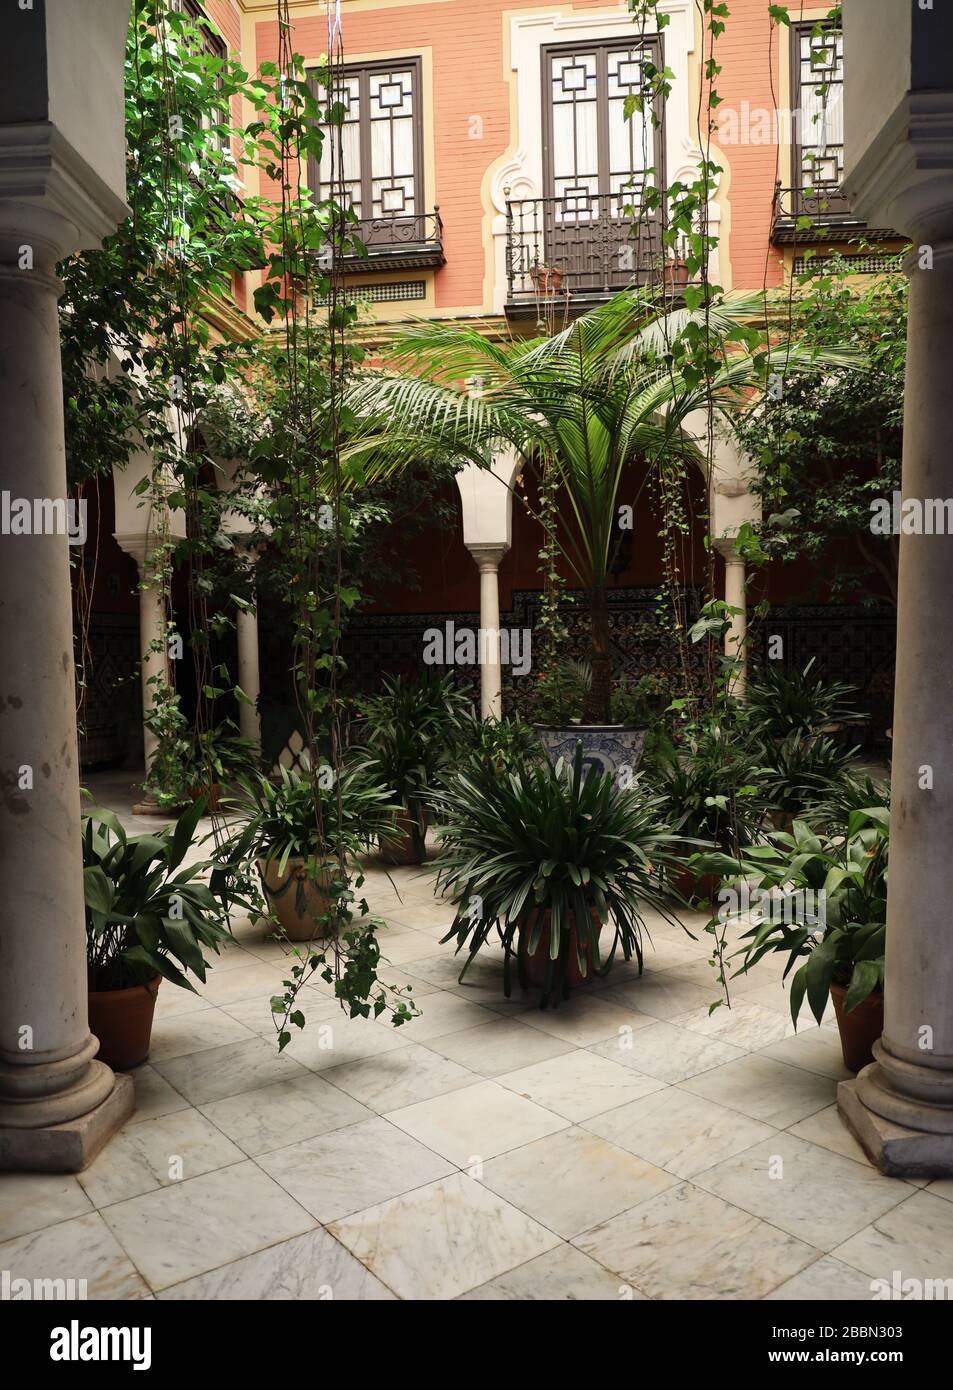 Traditional attractive, tranquil  courtyard with windows. balconies, plants.Spanish street scene.Feel good. Full frame. Seville, Andalucia, Spain Stock Photo